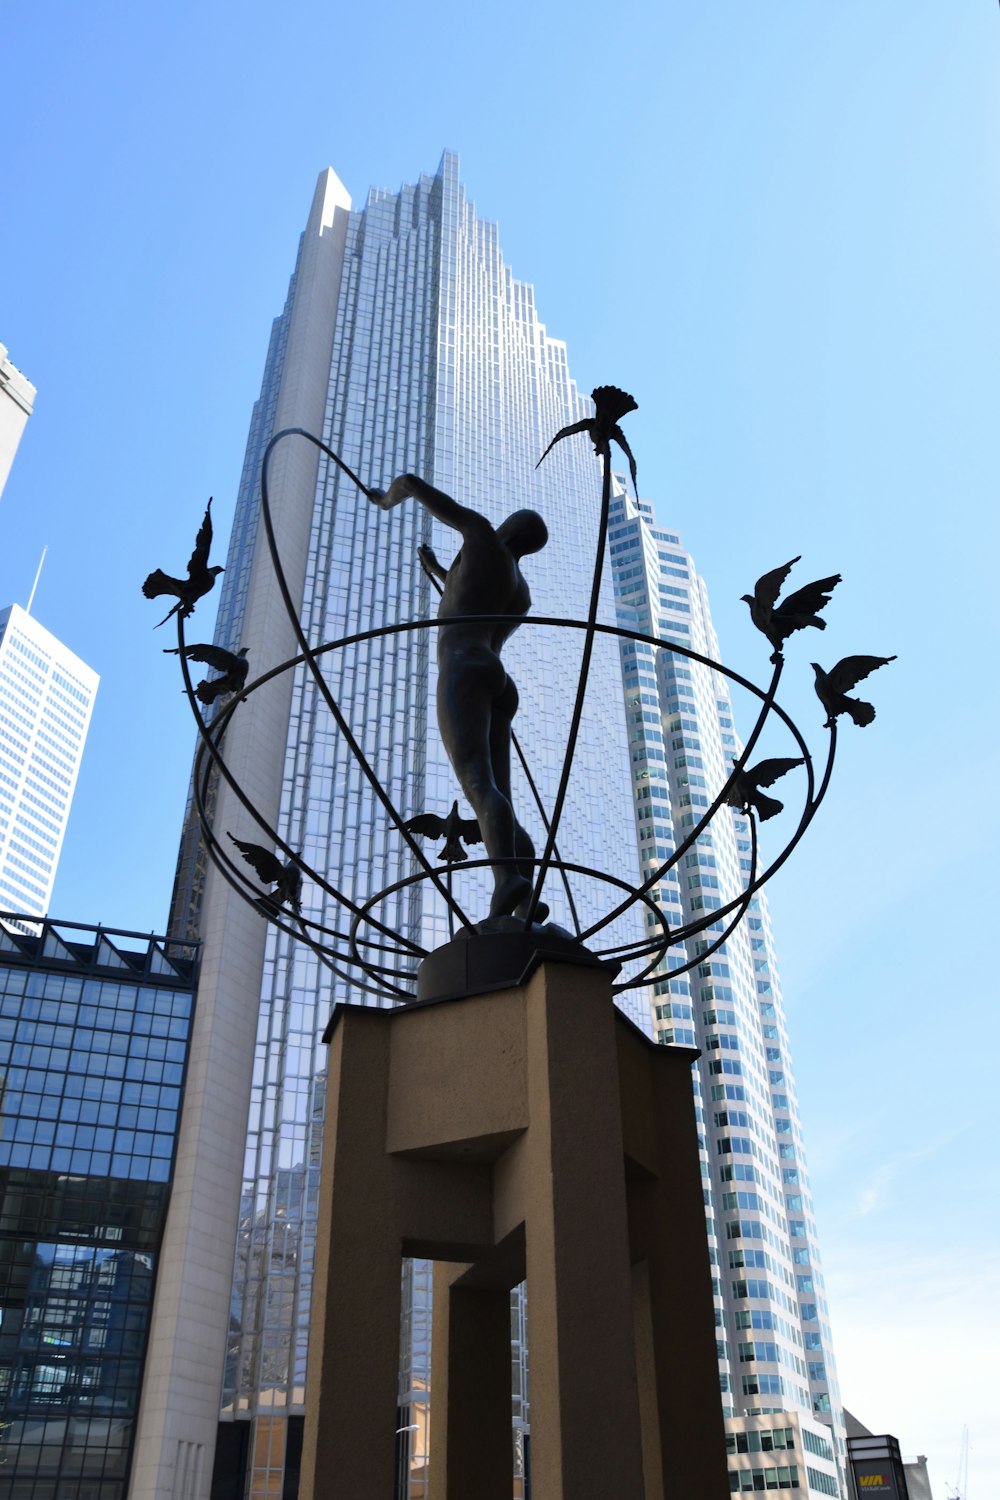 a statue of a man holding a globe in front of a tall building